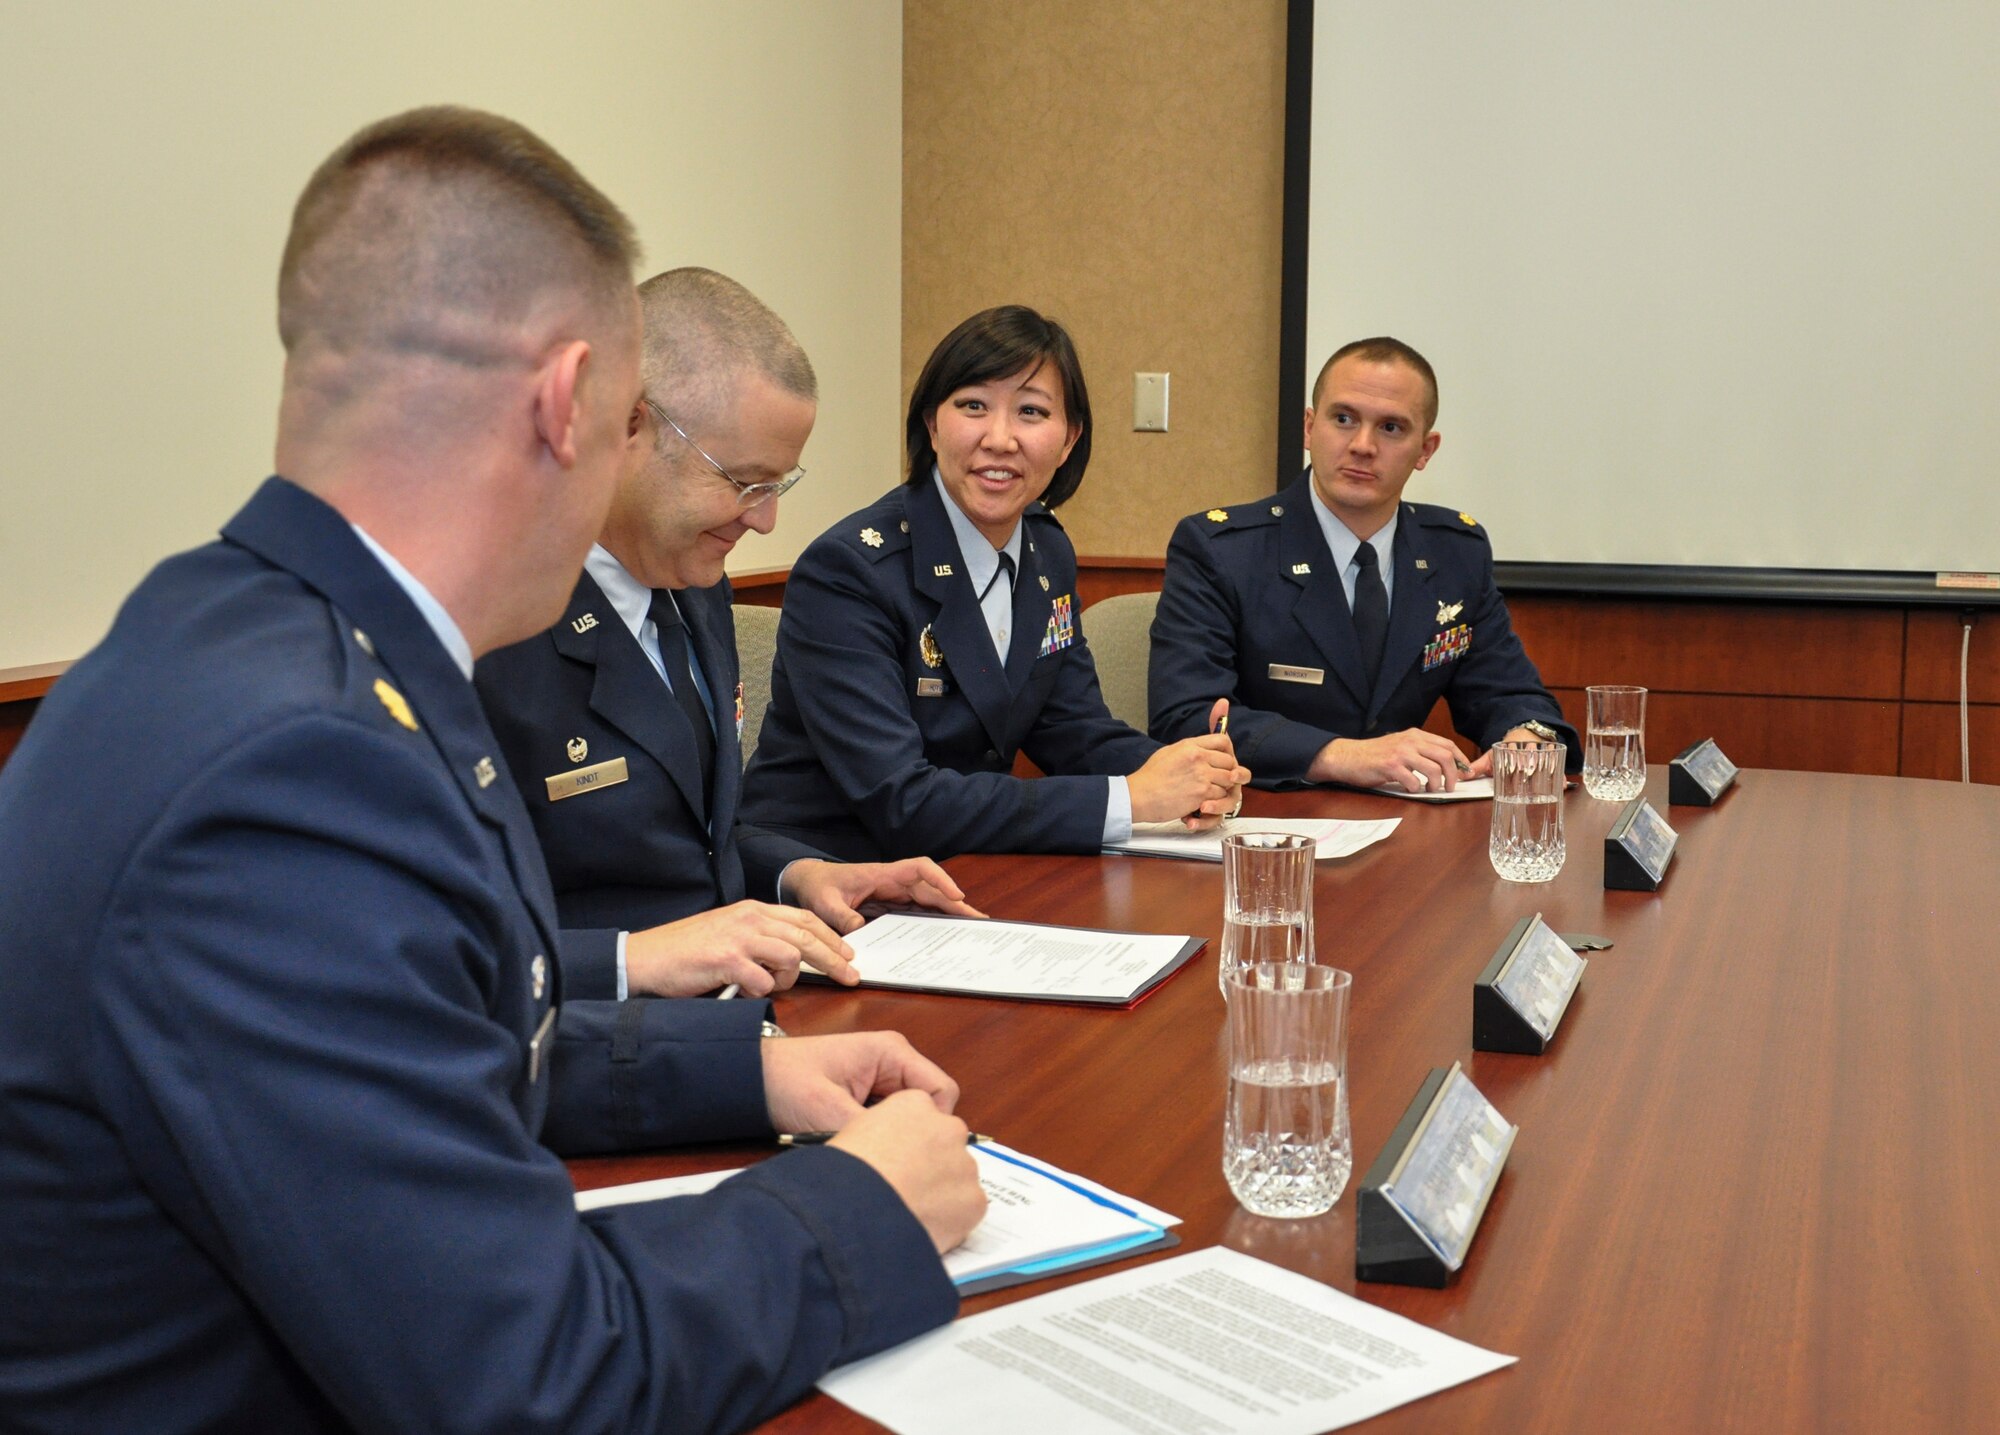 From left, Maj. Nicholas Musgrove, 460th Logistics Readiness Squadron commander; Col. Michael Kindt, 460th Medical Group commander and officer awards board president; Lt. Col. Julie Huygen, 460th Space Wing staff judge advocate; and Maj. Peter Norsky, 460th Operations Group standards and evaluation chief, discuss the annual awards board process Jan. 27, 2014, at the 460th SW headquarters building on Buckley Air Force Base, Colo. All competitors met the annual awards board as part of their overall submission packages. (U.S. Air Force photo by Staff Sgt. Nicholas Rau/Released)